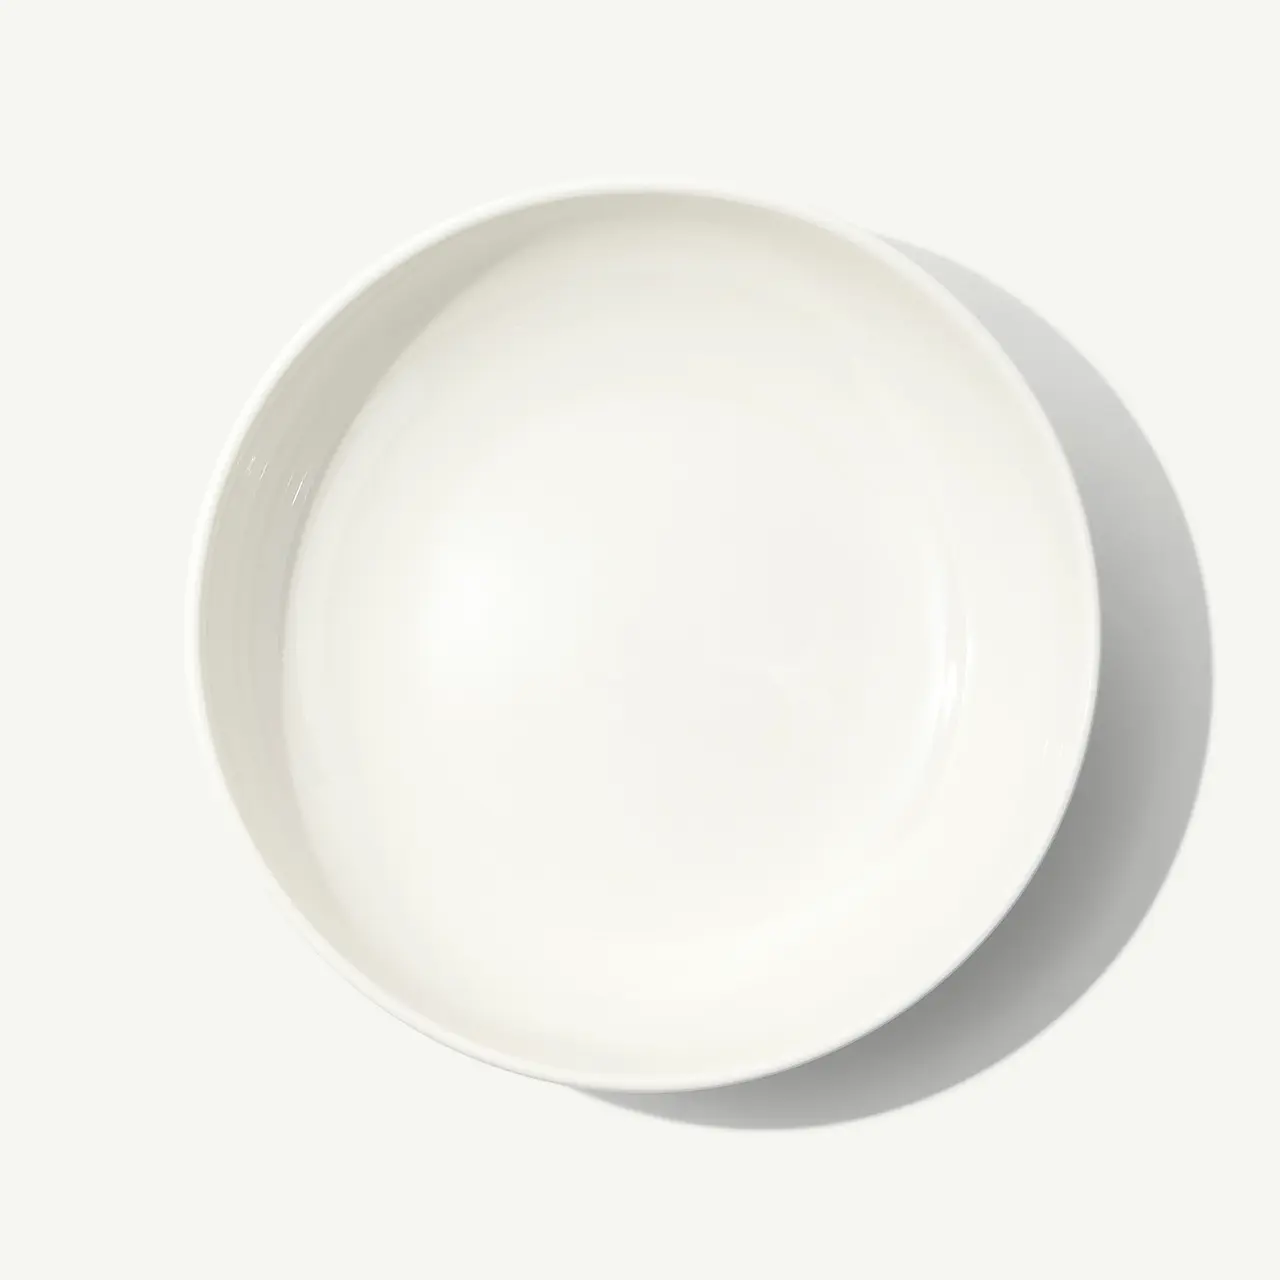 A plain white circular plate is centered on a light background.